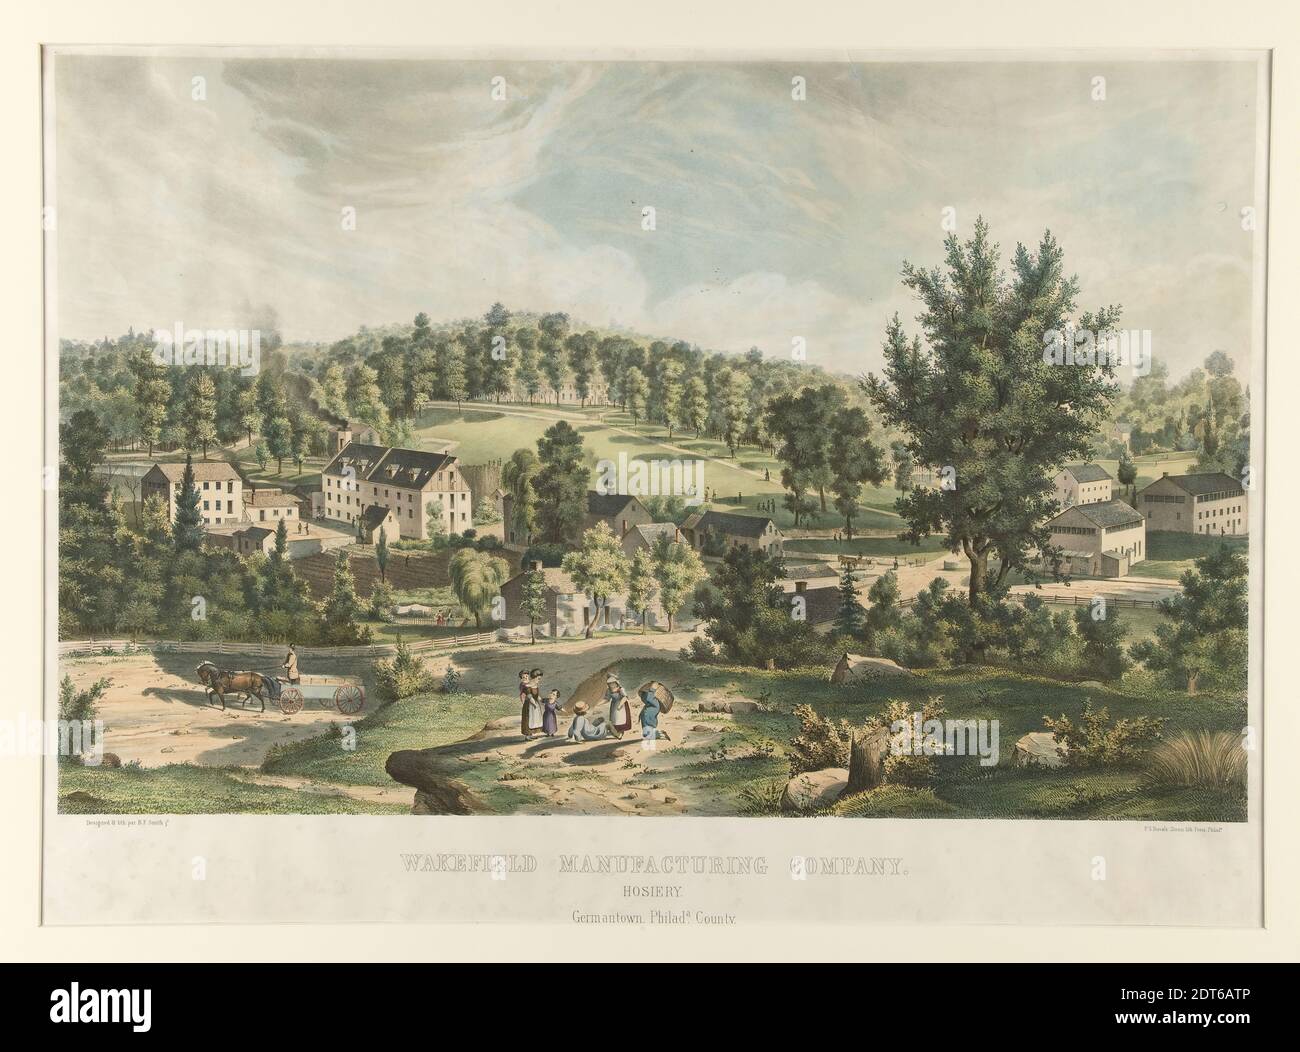 Artist: Benjamin F. Smith, Jr., American, 1830–1927, Wakefield Manufacturing Company. Hosiery. Germantown, Philadelphia County., Colored lithograph, sheet: 50.8 × 71.8 cm (20 × 28 1/4 in.), Made in United States, American, 19th century, Works on Paper - Prints Stock Photo